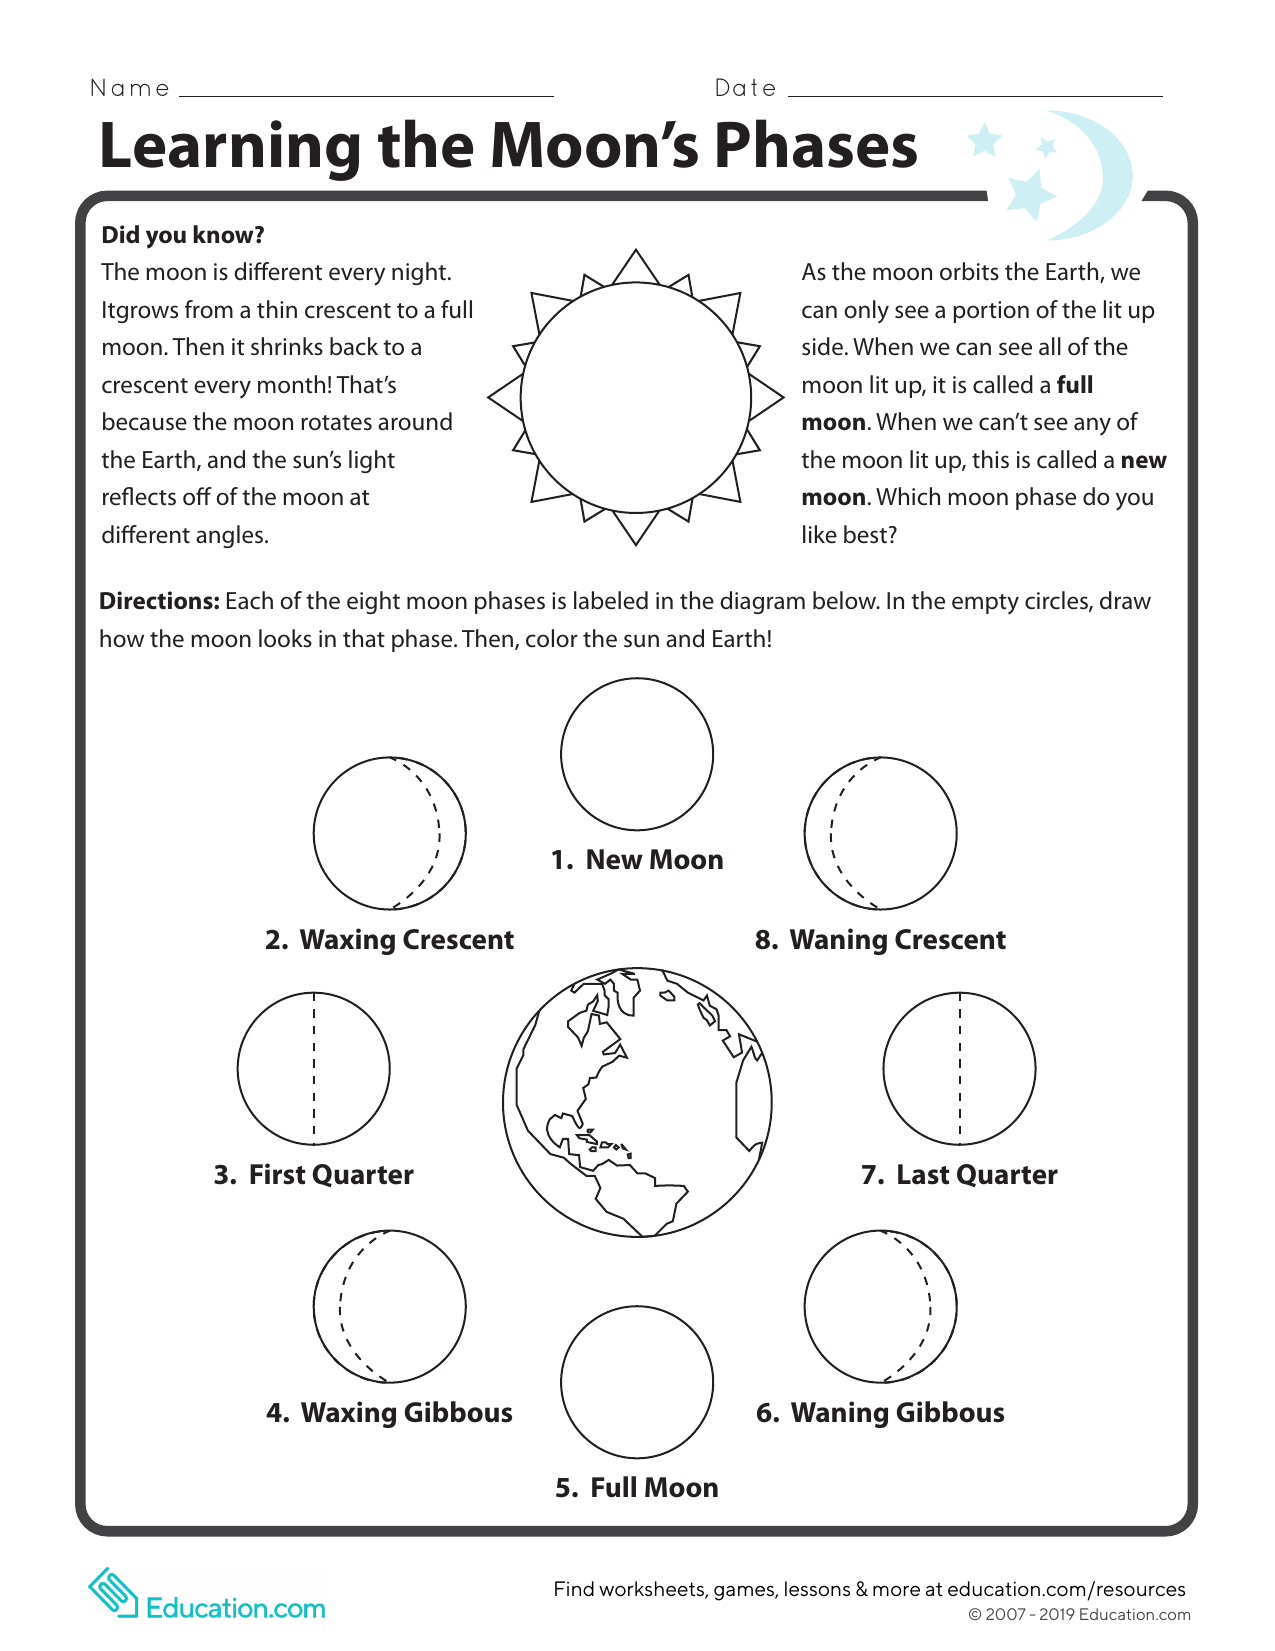 learning-moon-phases Intended For Moon Phases Worksheet Answers